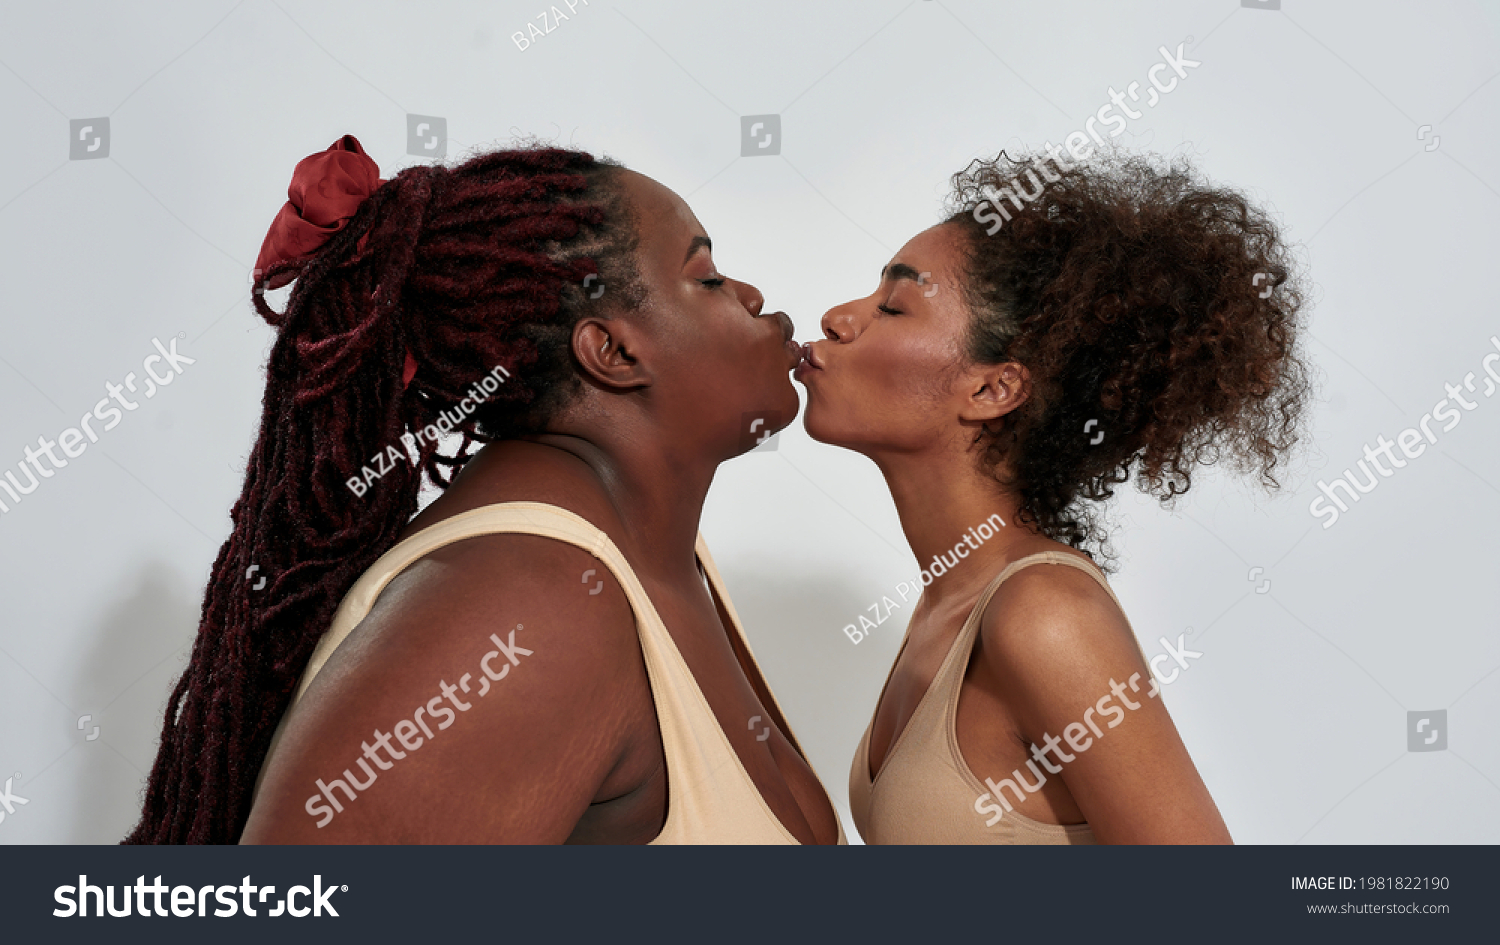 Ebony and whote spit kissing